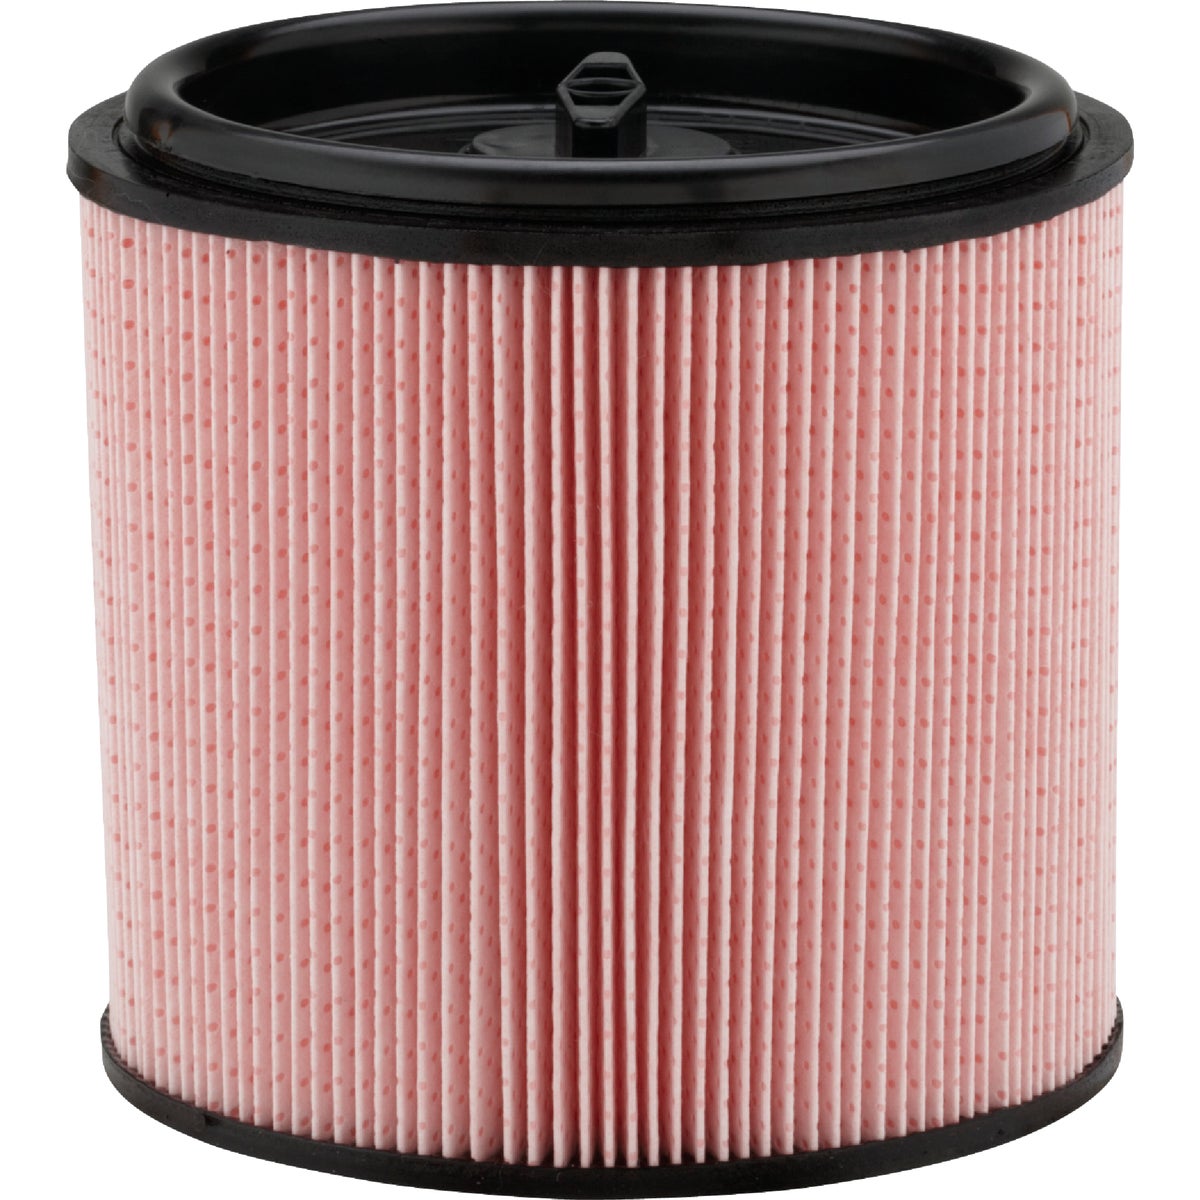 Channellock Cartridge Fine Dust 5 to 20 Gal. Vacuum Filter